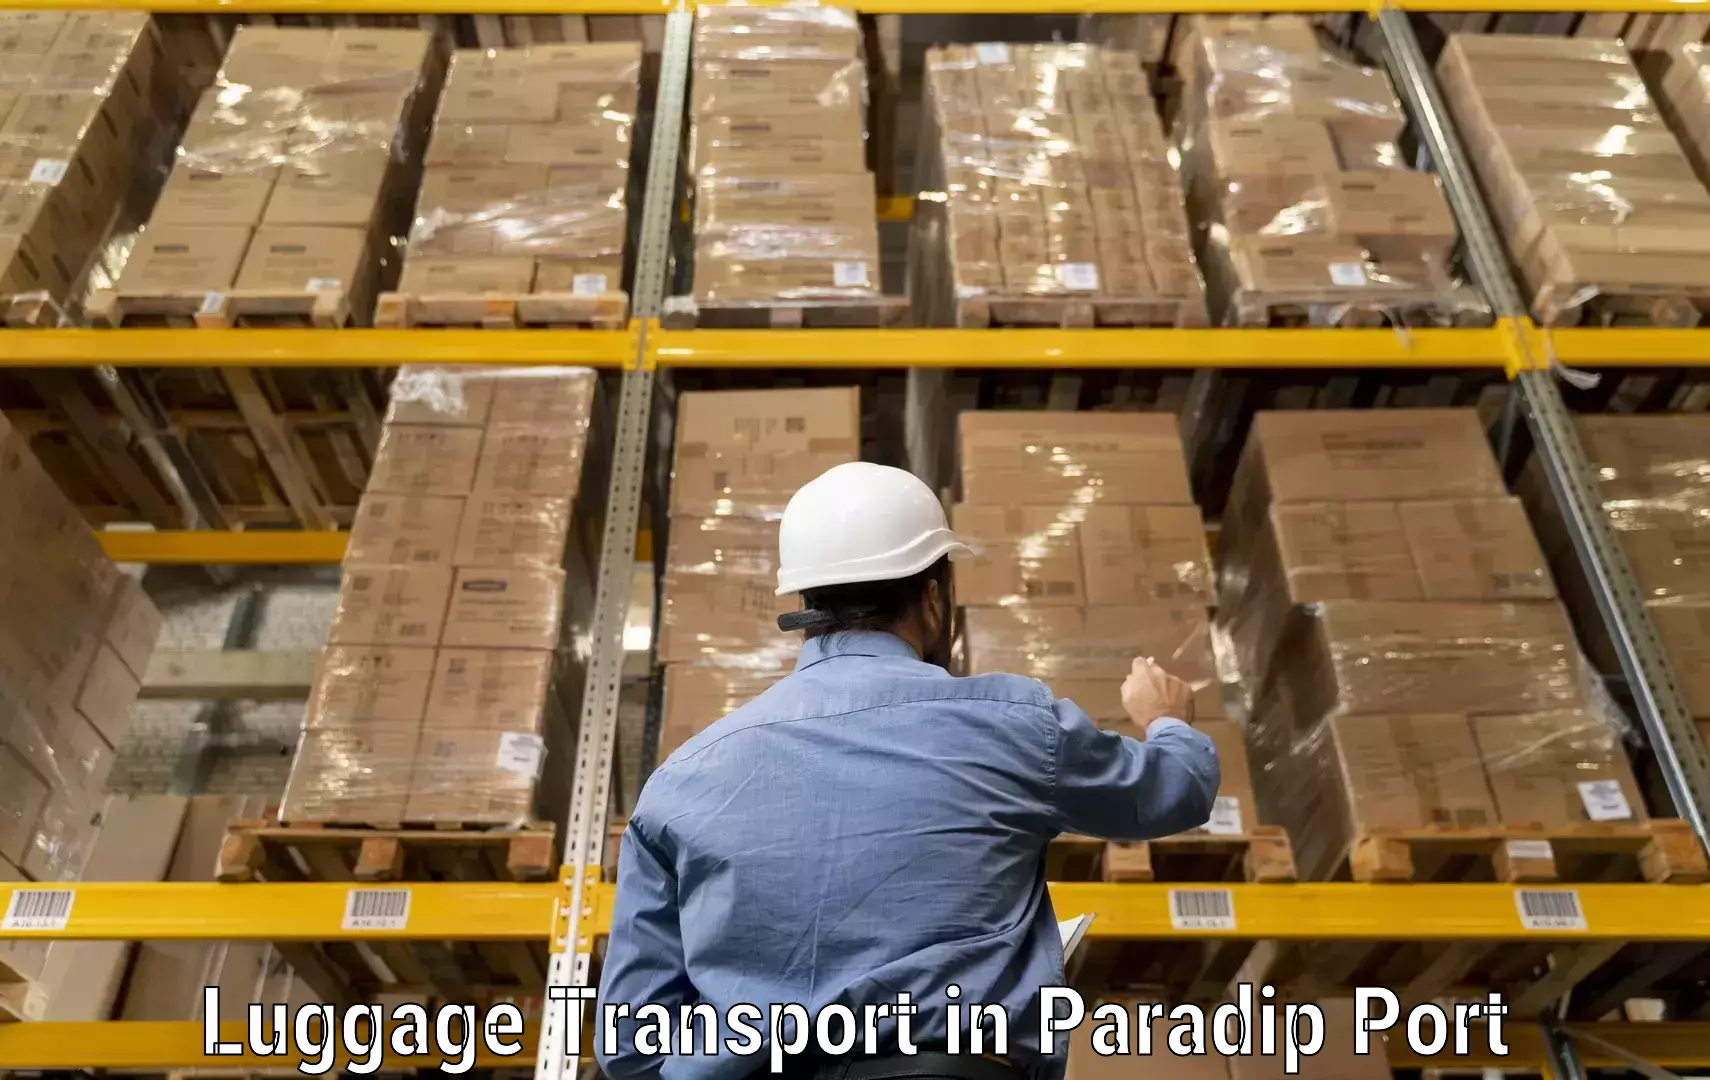 Luggage dispatch service in Paradip Port